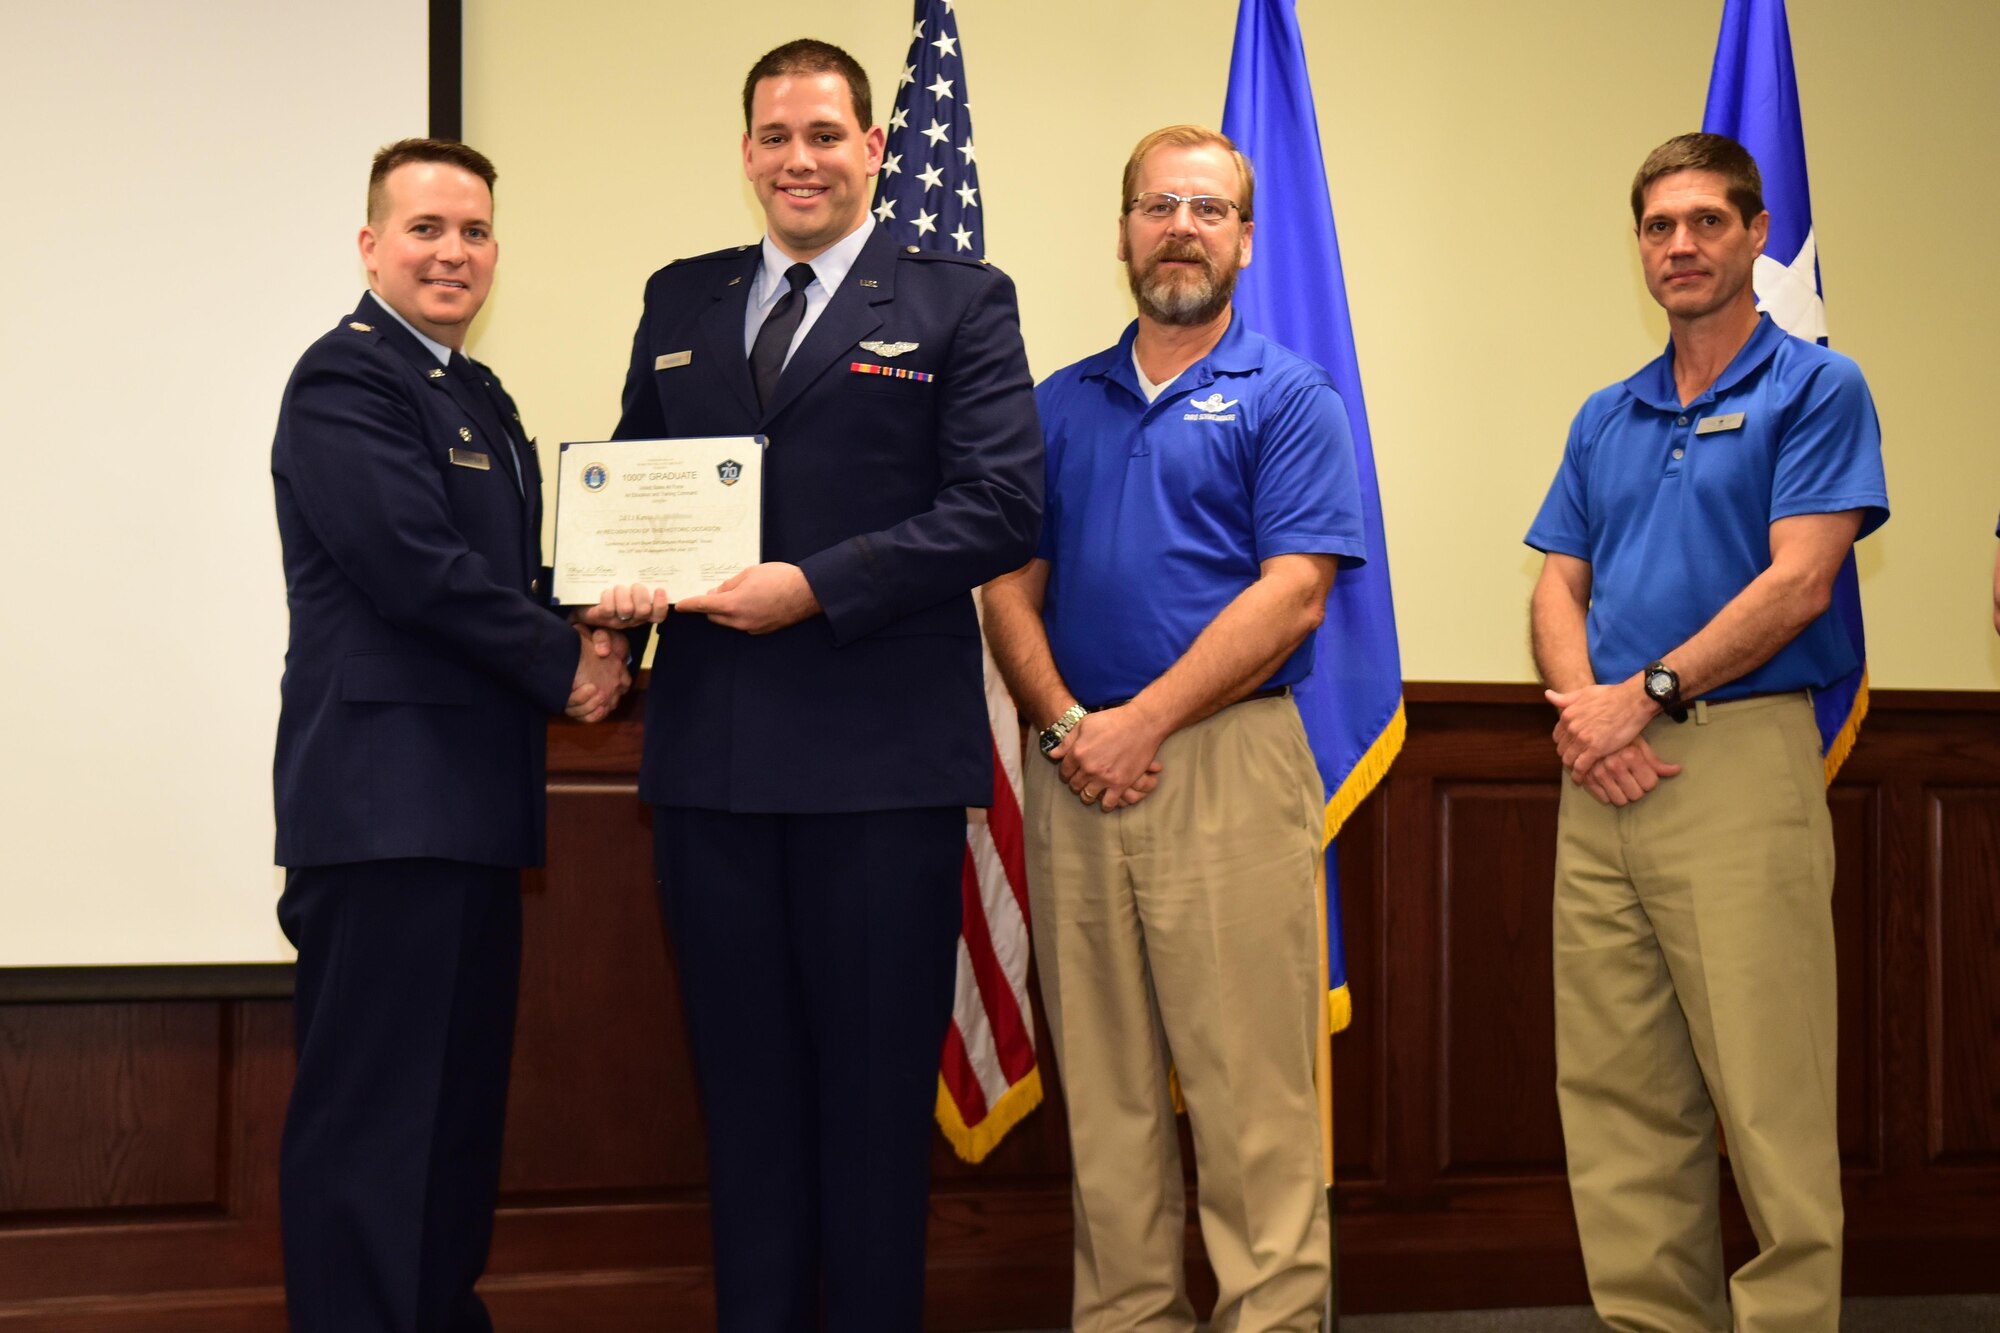 Lt. Col. Jason Thompson, 558th Flying Training Squadron Commander, presents a certificate to the thousandth Undergraduate Remotely Piloted Aircraft Training graduate, 2nd Lt. Kevin, during a graduation ceremony Jan 20th at Joint Base San Antonio-Randolph, Texas. Chris Schweinberg and James Taylor, were both cadre members when the URT program grew to become a squadron in 2010. (U.S. Air Force photo illustration by Randy Martin) 